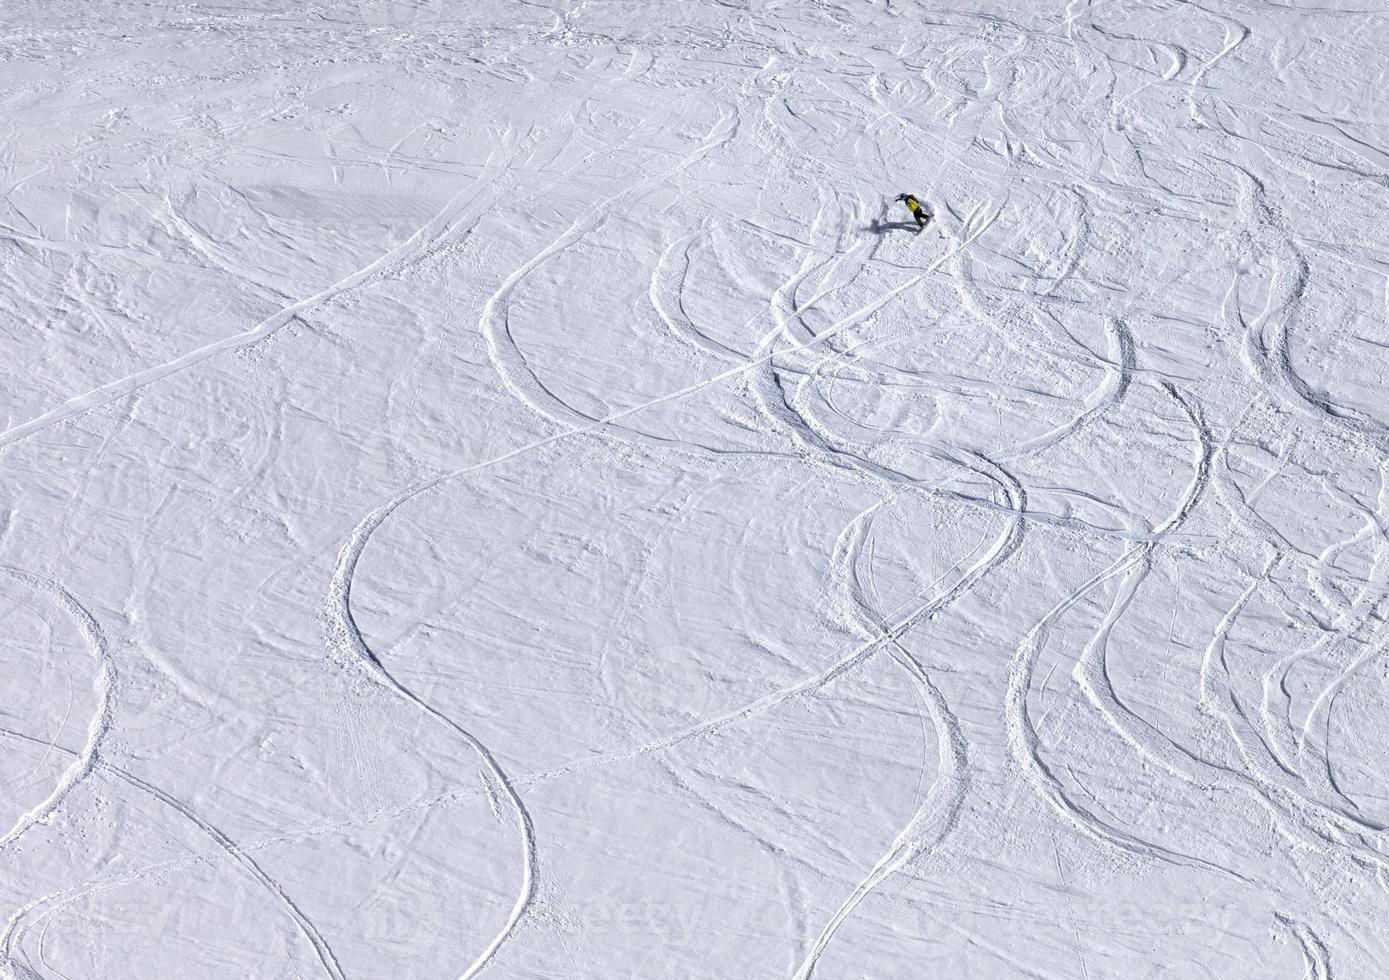 Snowboarder downhill on off piste slope with newly-fallen snow photo